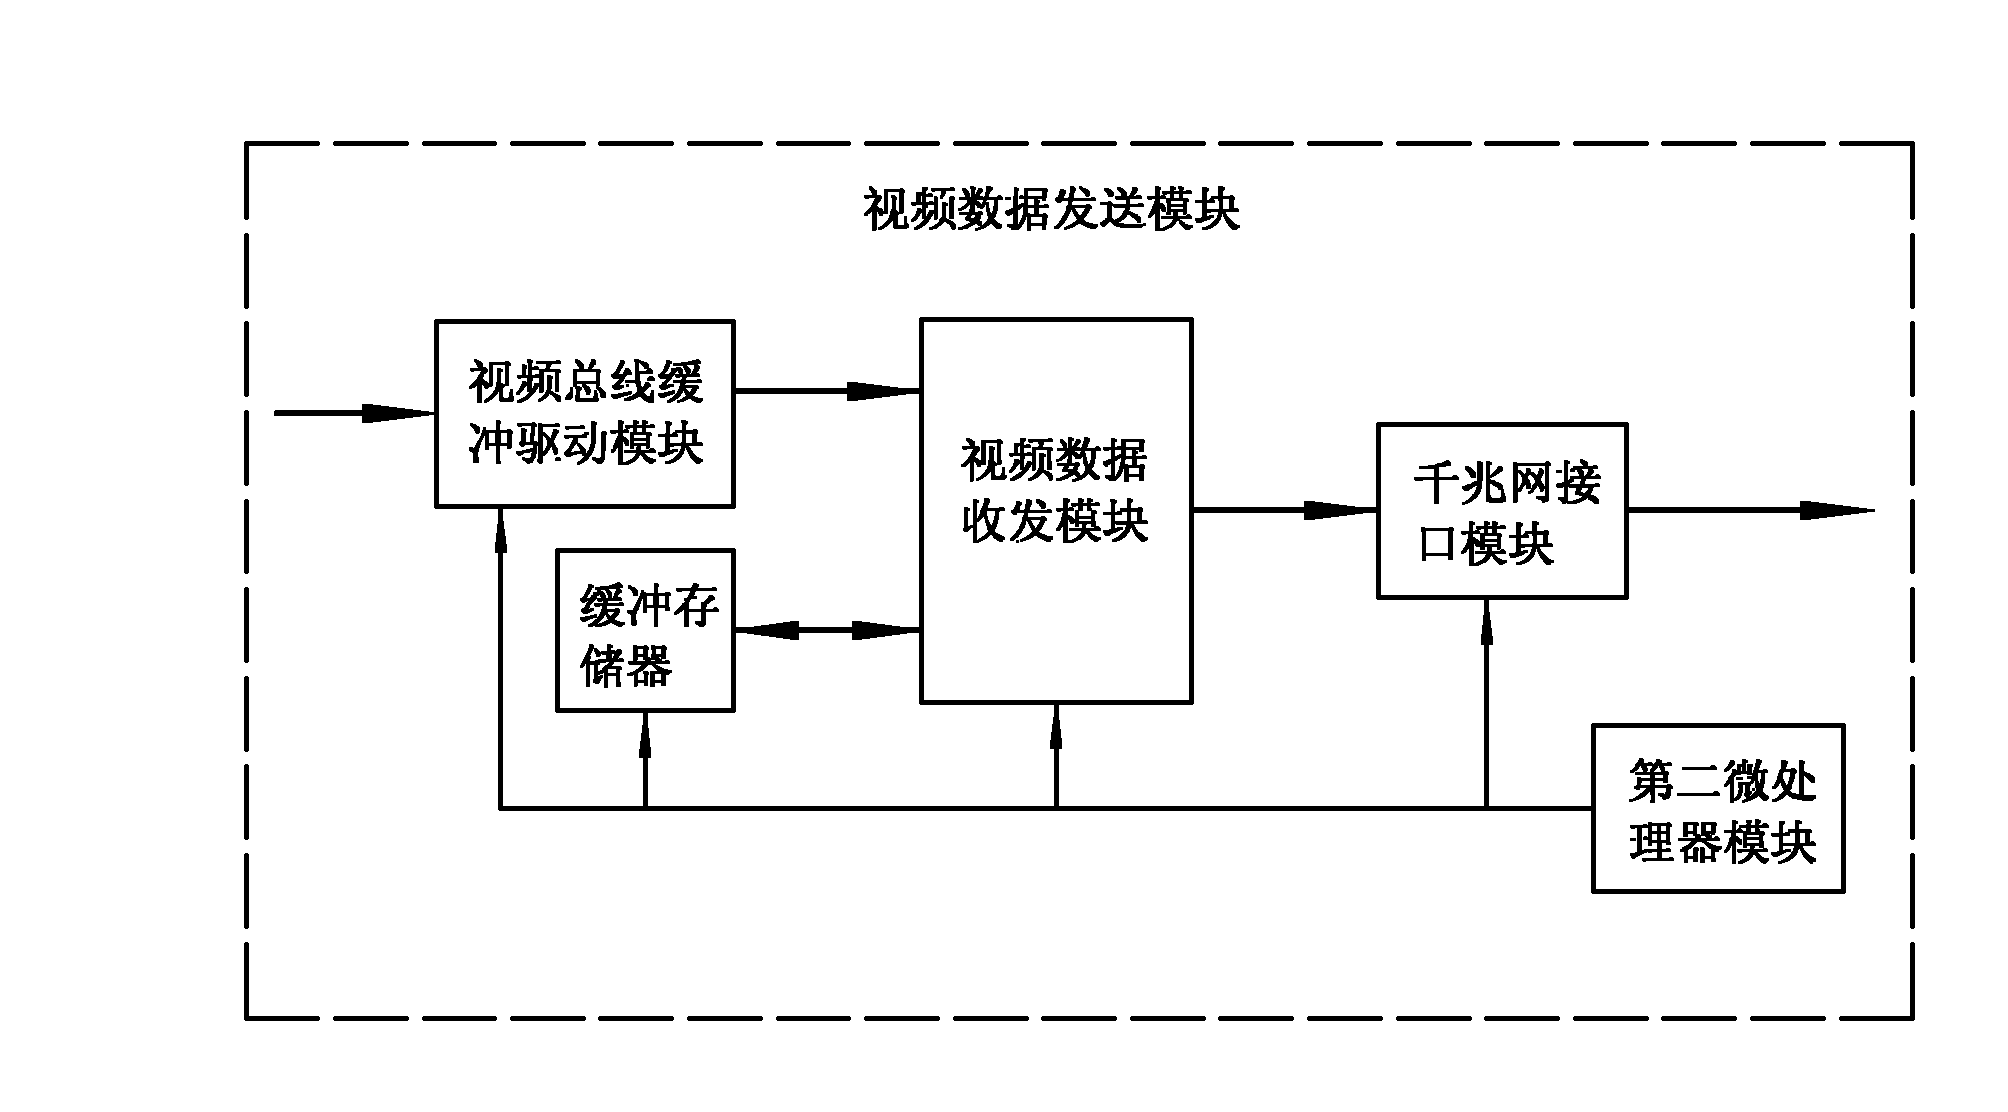 Full-color high-definition video control system for light-emitting diode (LED) display screen